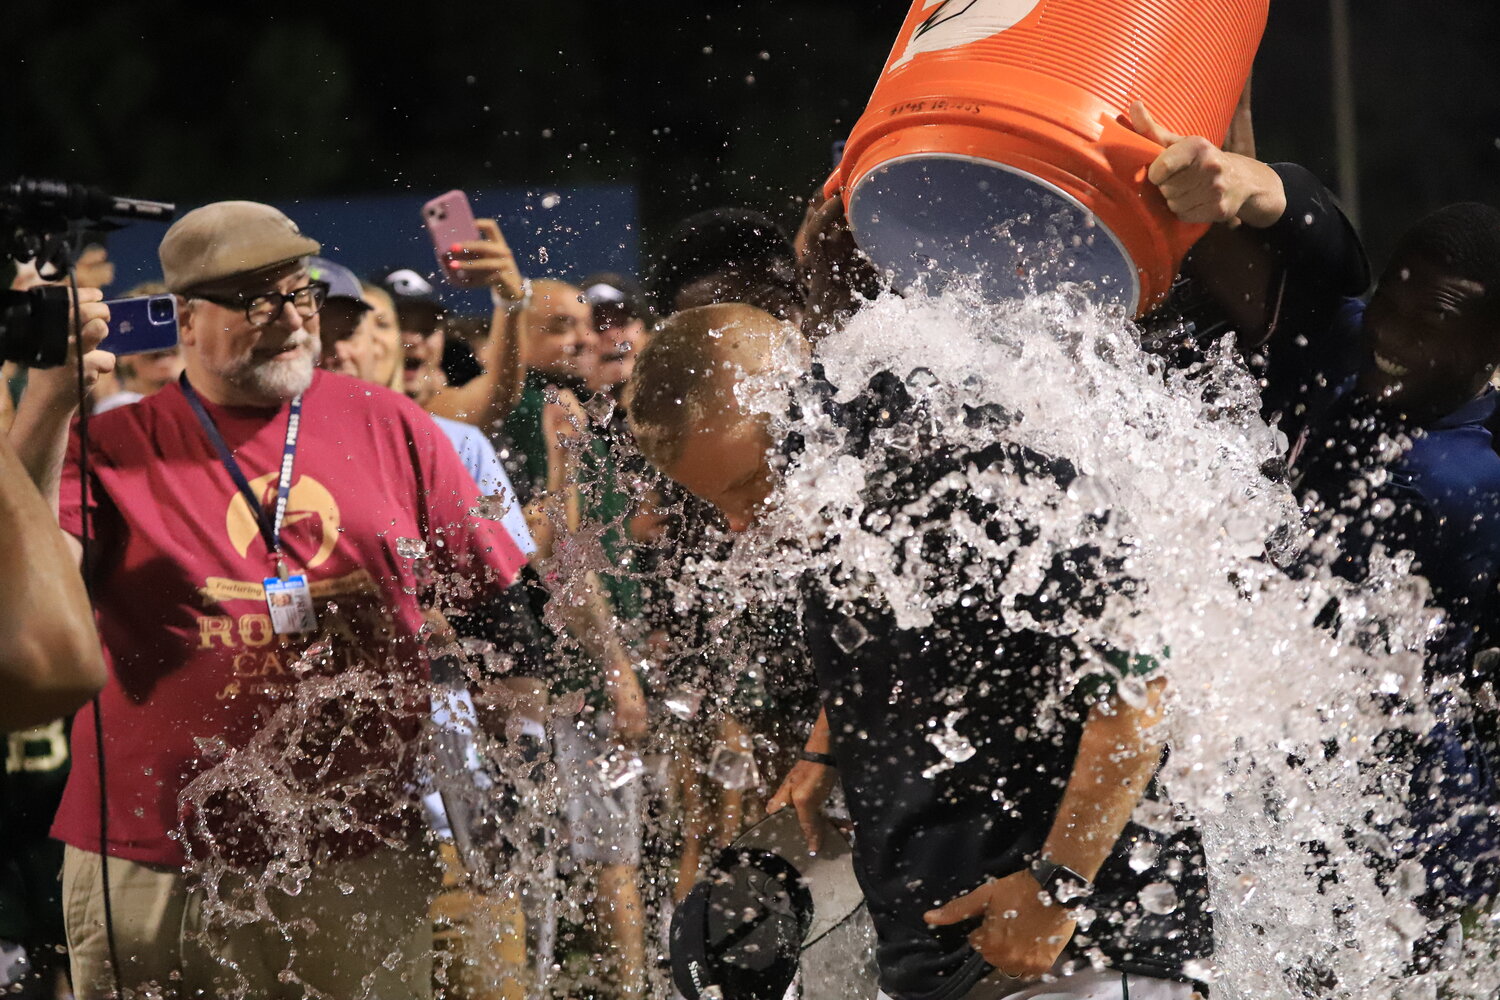 River Bluff coach Mark Bonnette gets doused in ice water following his team's 5A state championship win against Blythewood Wednesday night.